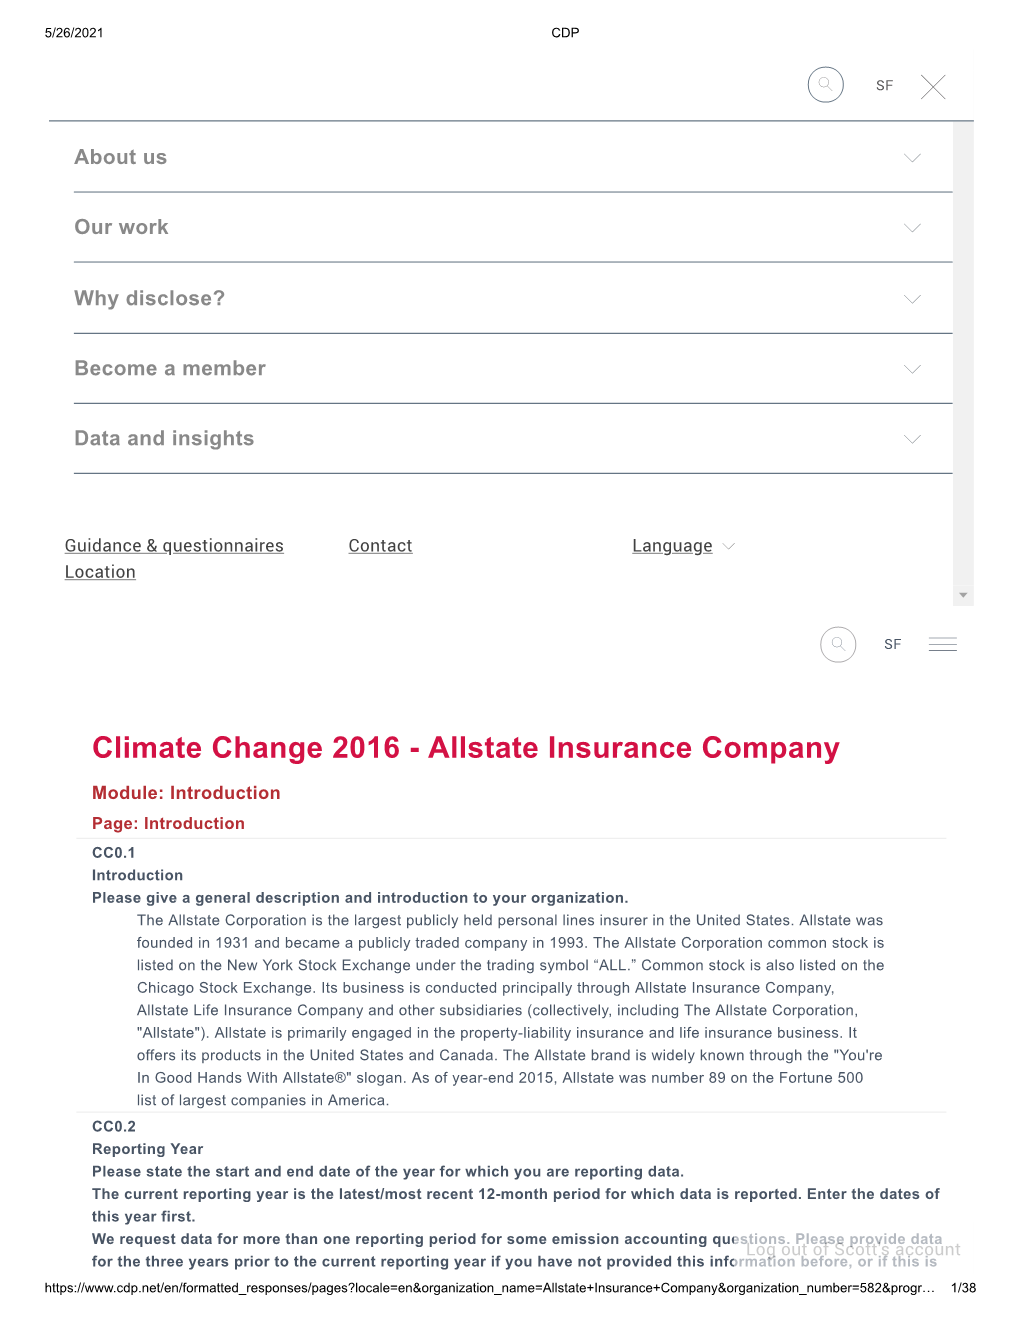 Climate Change 2016 - Allstate Insurance Company